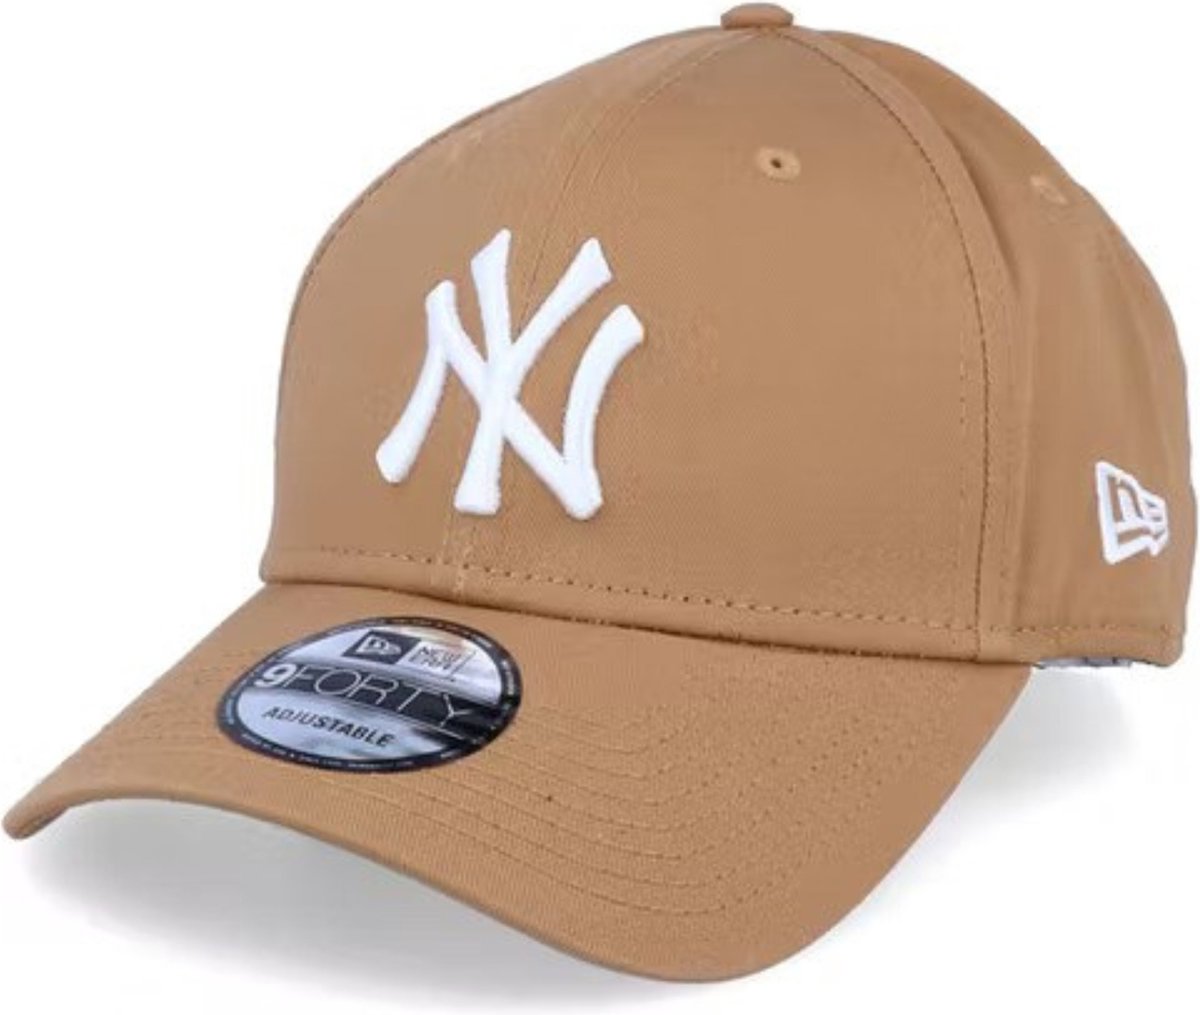 New York Yankees Cap YOUTH - SS23 Collectie - Camel - 6 tot 12